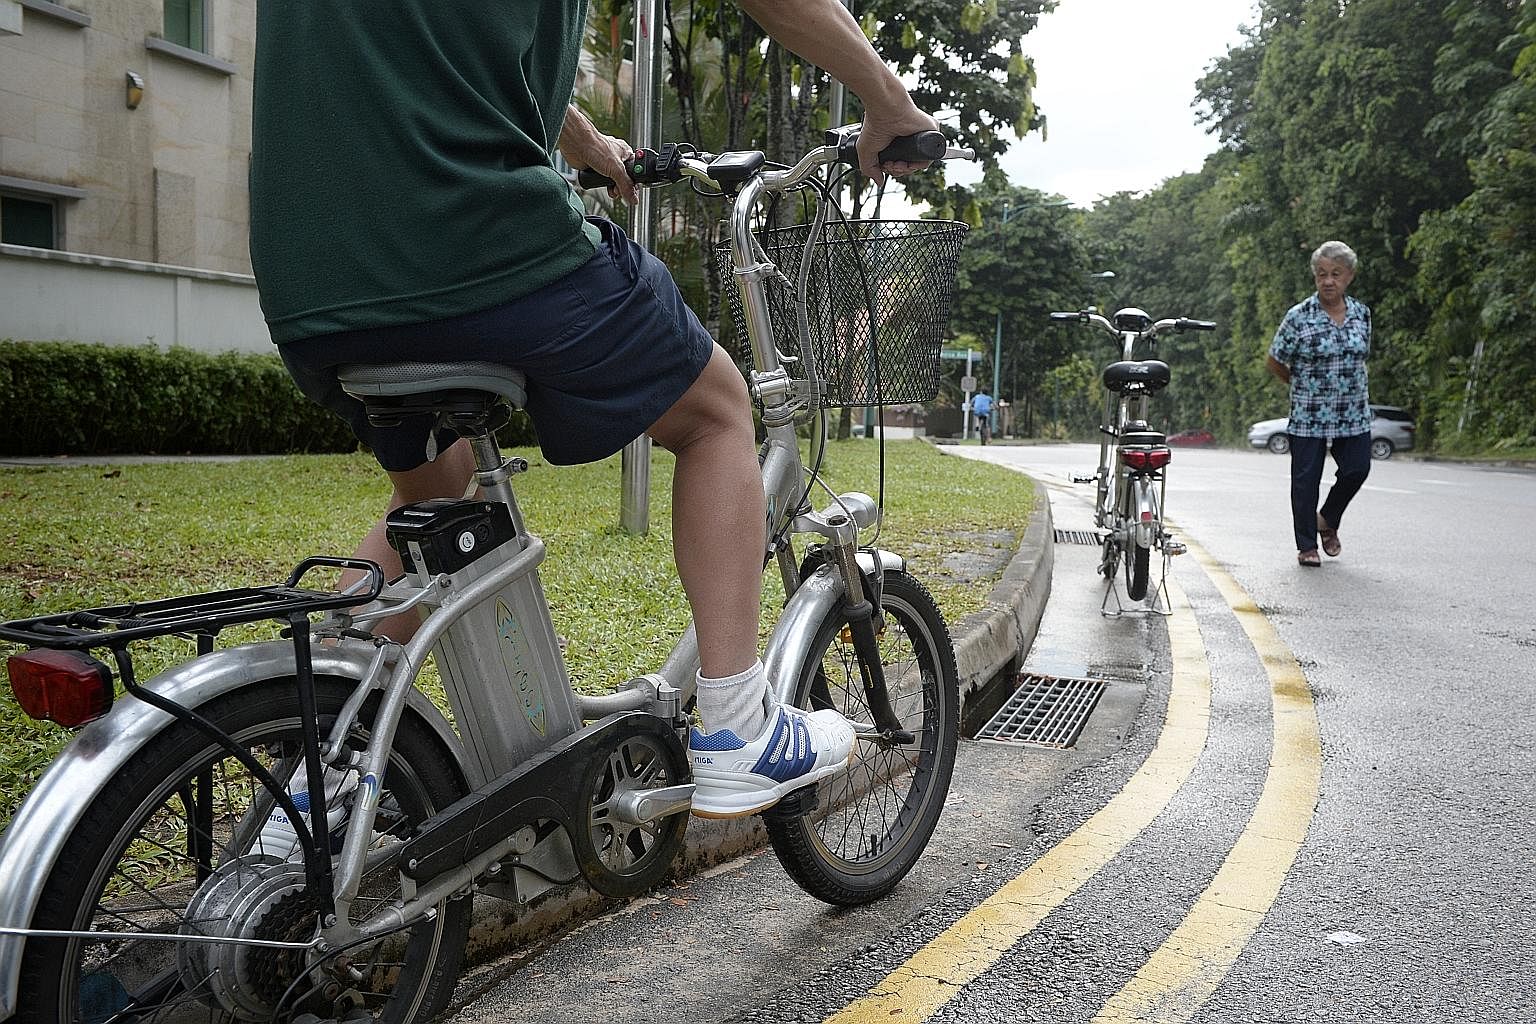 When e-bike registration comes into force, e-bikes will cross a psychological barrier, from toy to mode of transport, from road nuisance to road native. And because they are registered, maybe they will earn more than the right to exist; e-bikers migh